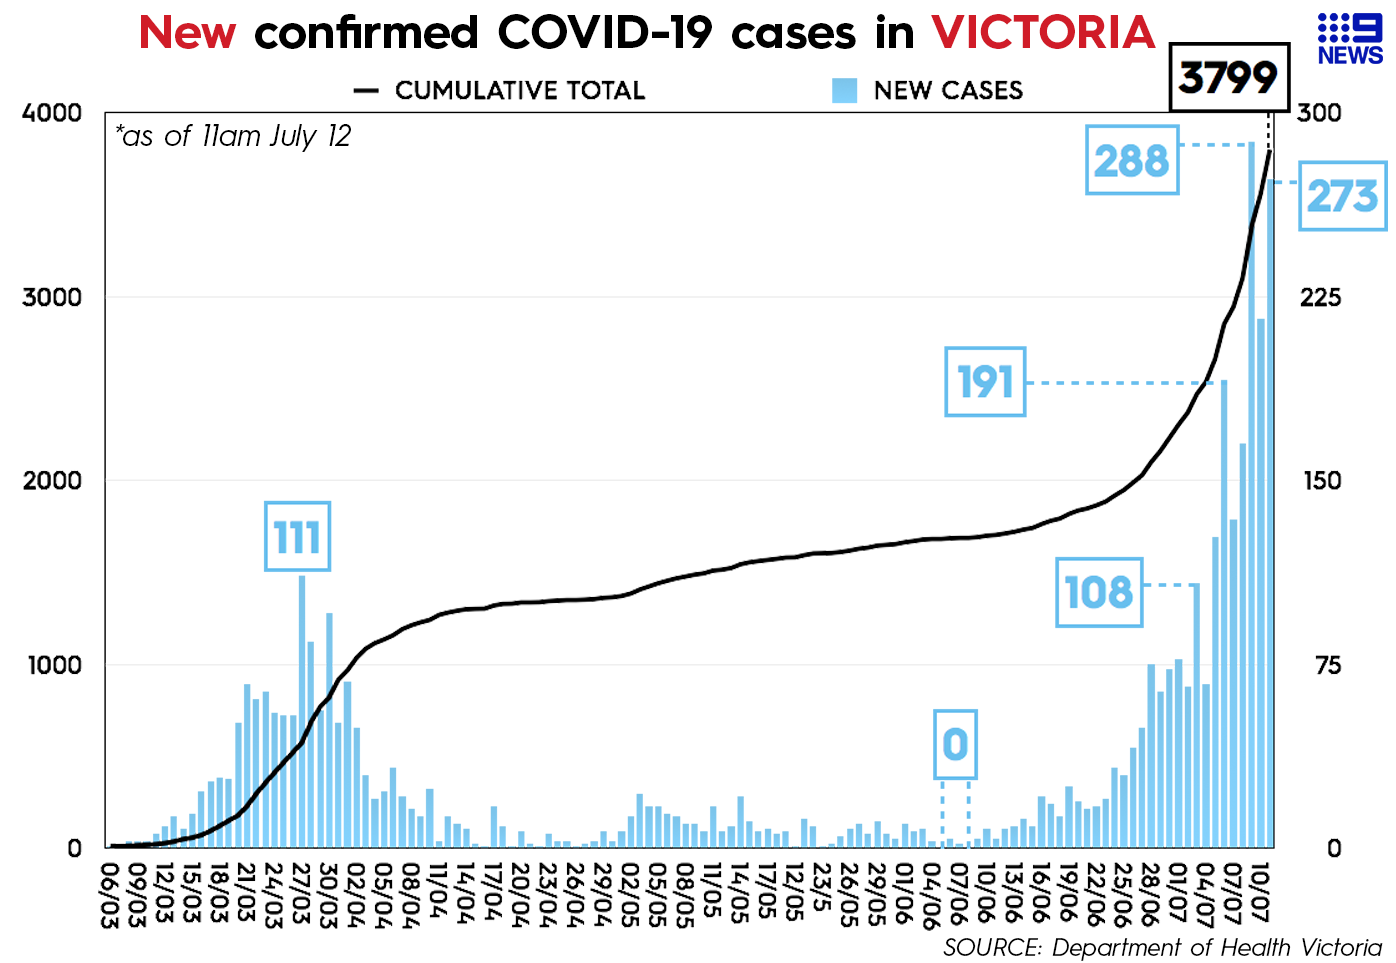 Victoria COVID-19 cases as of July 12, 2020.